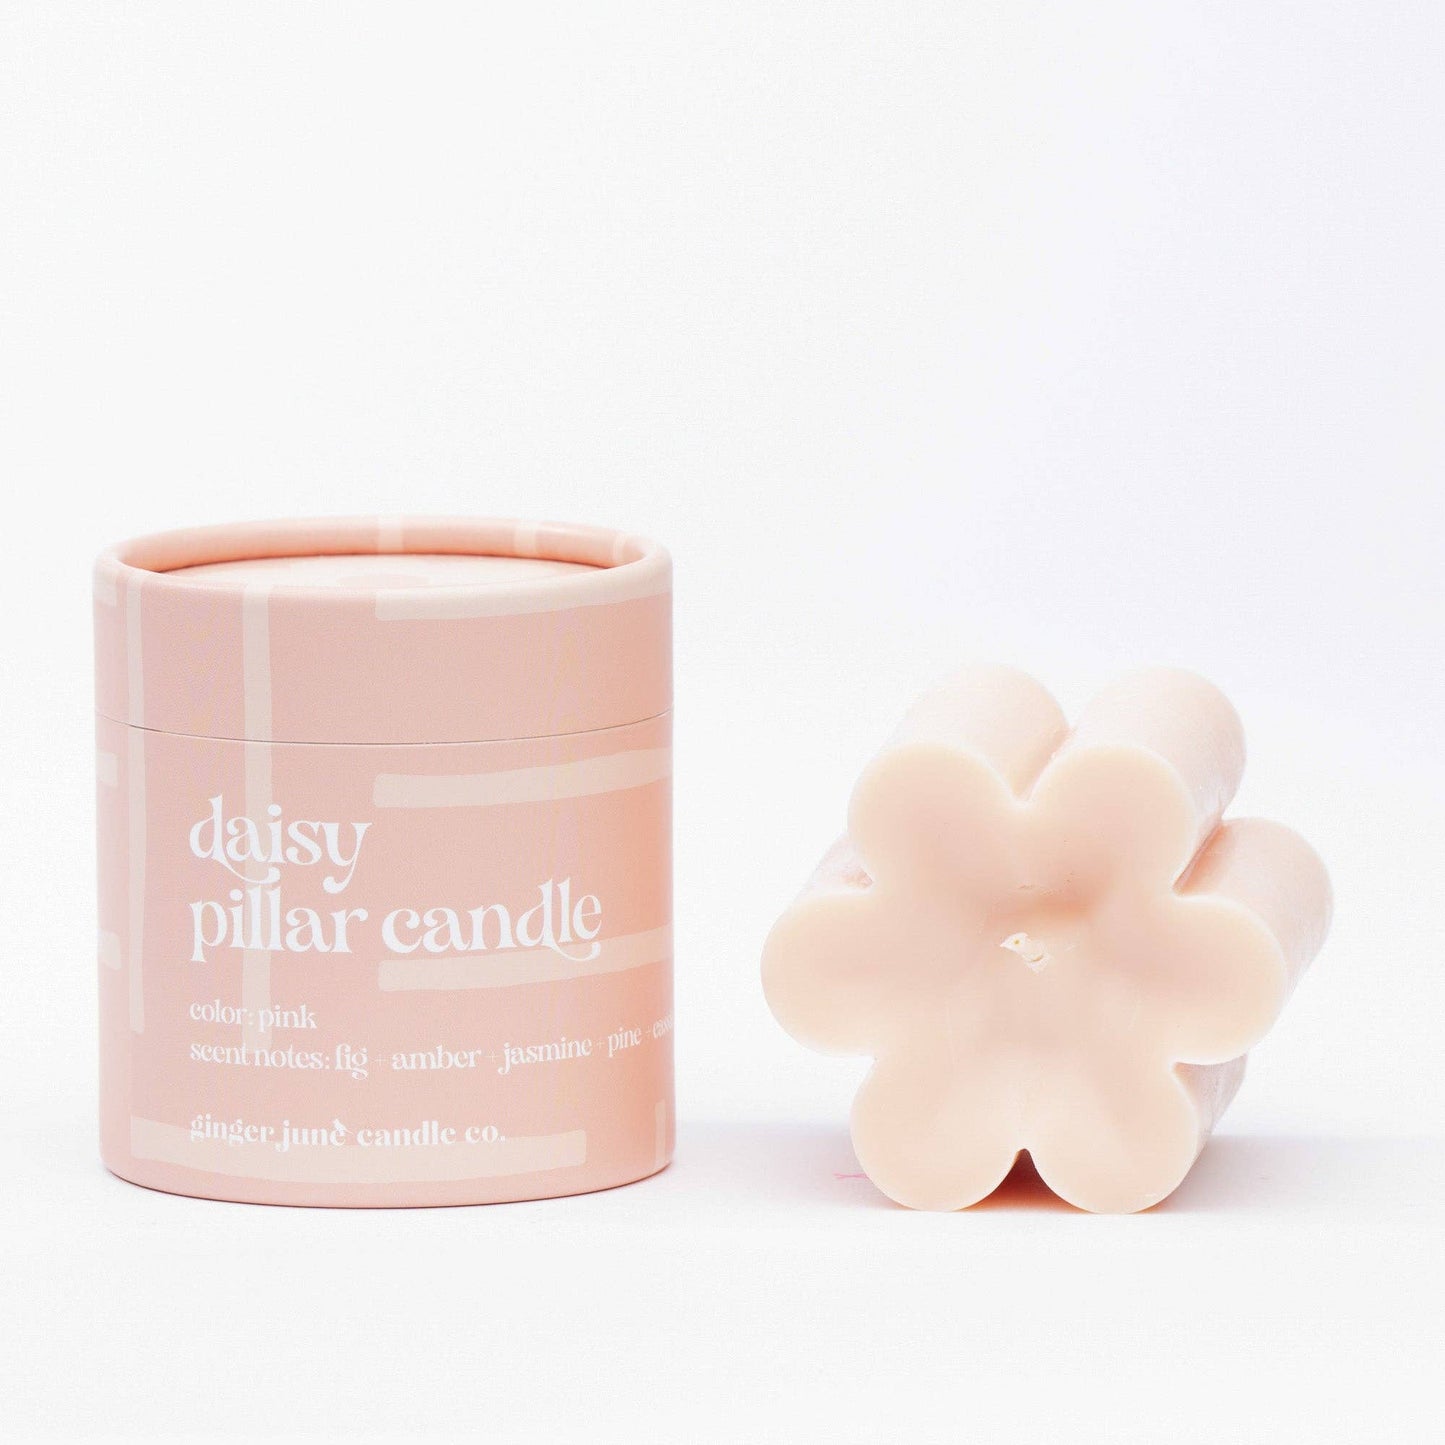 Ginger June Candle Co. - pink daisy pillar candle  • 9 oz soy candle